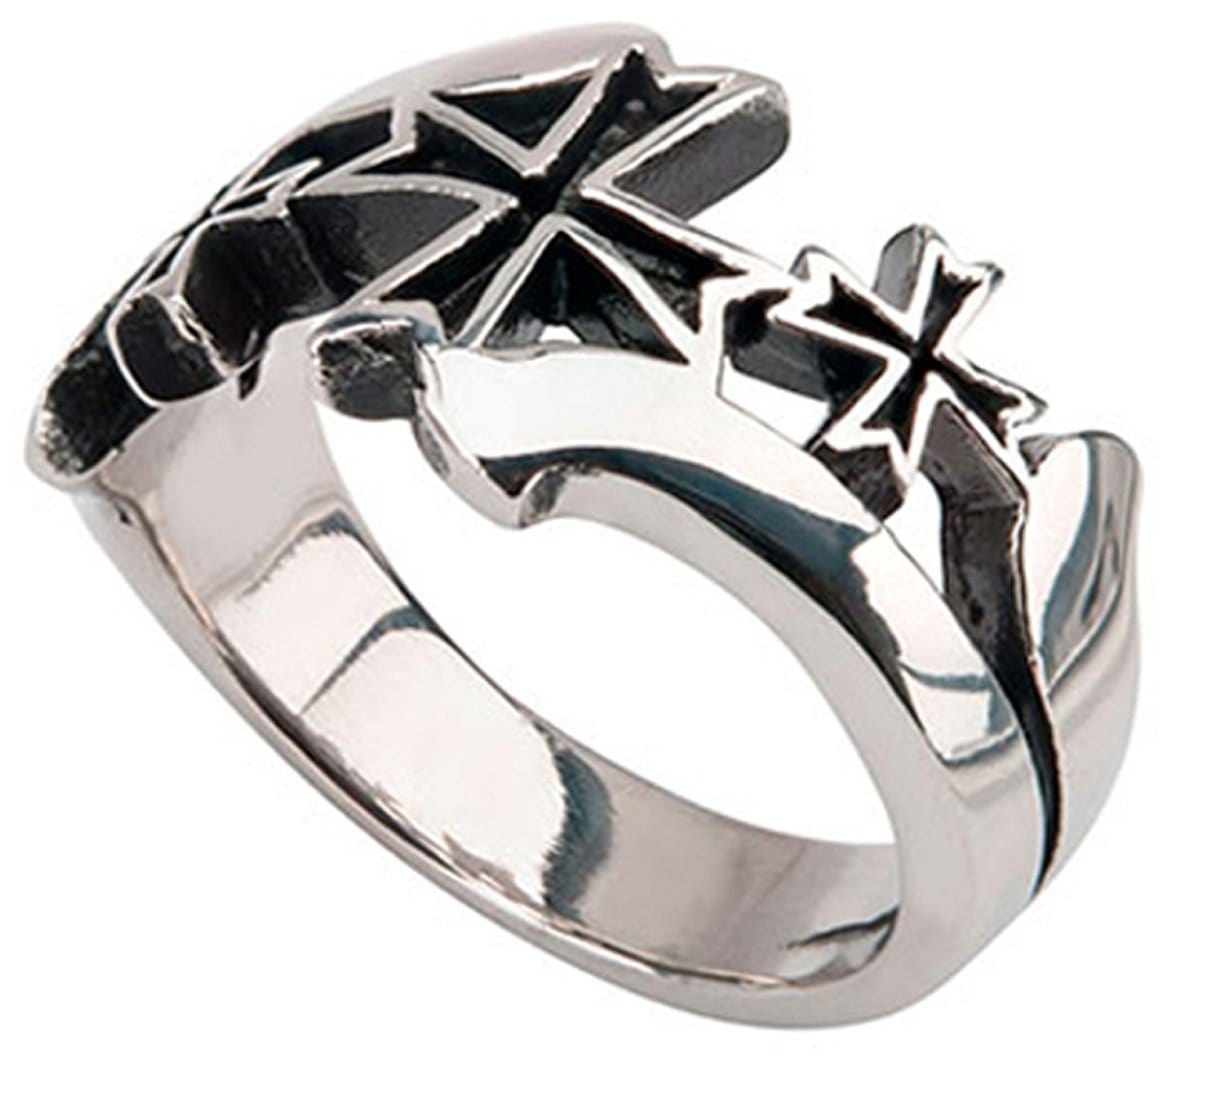 INOX JEWELRY Rings Antiqued Silver Tone Stainless Steel Cross Pattée Alisee Cut Out Ring